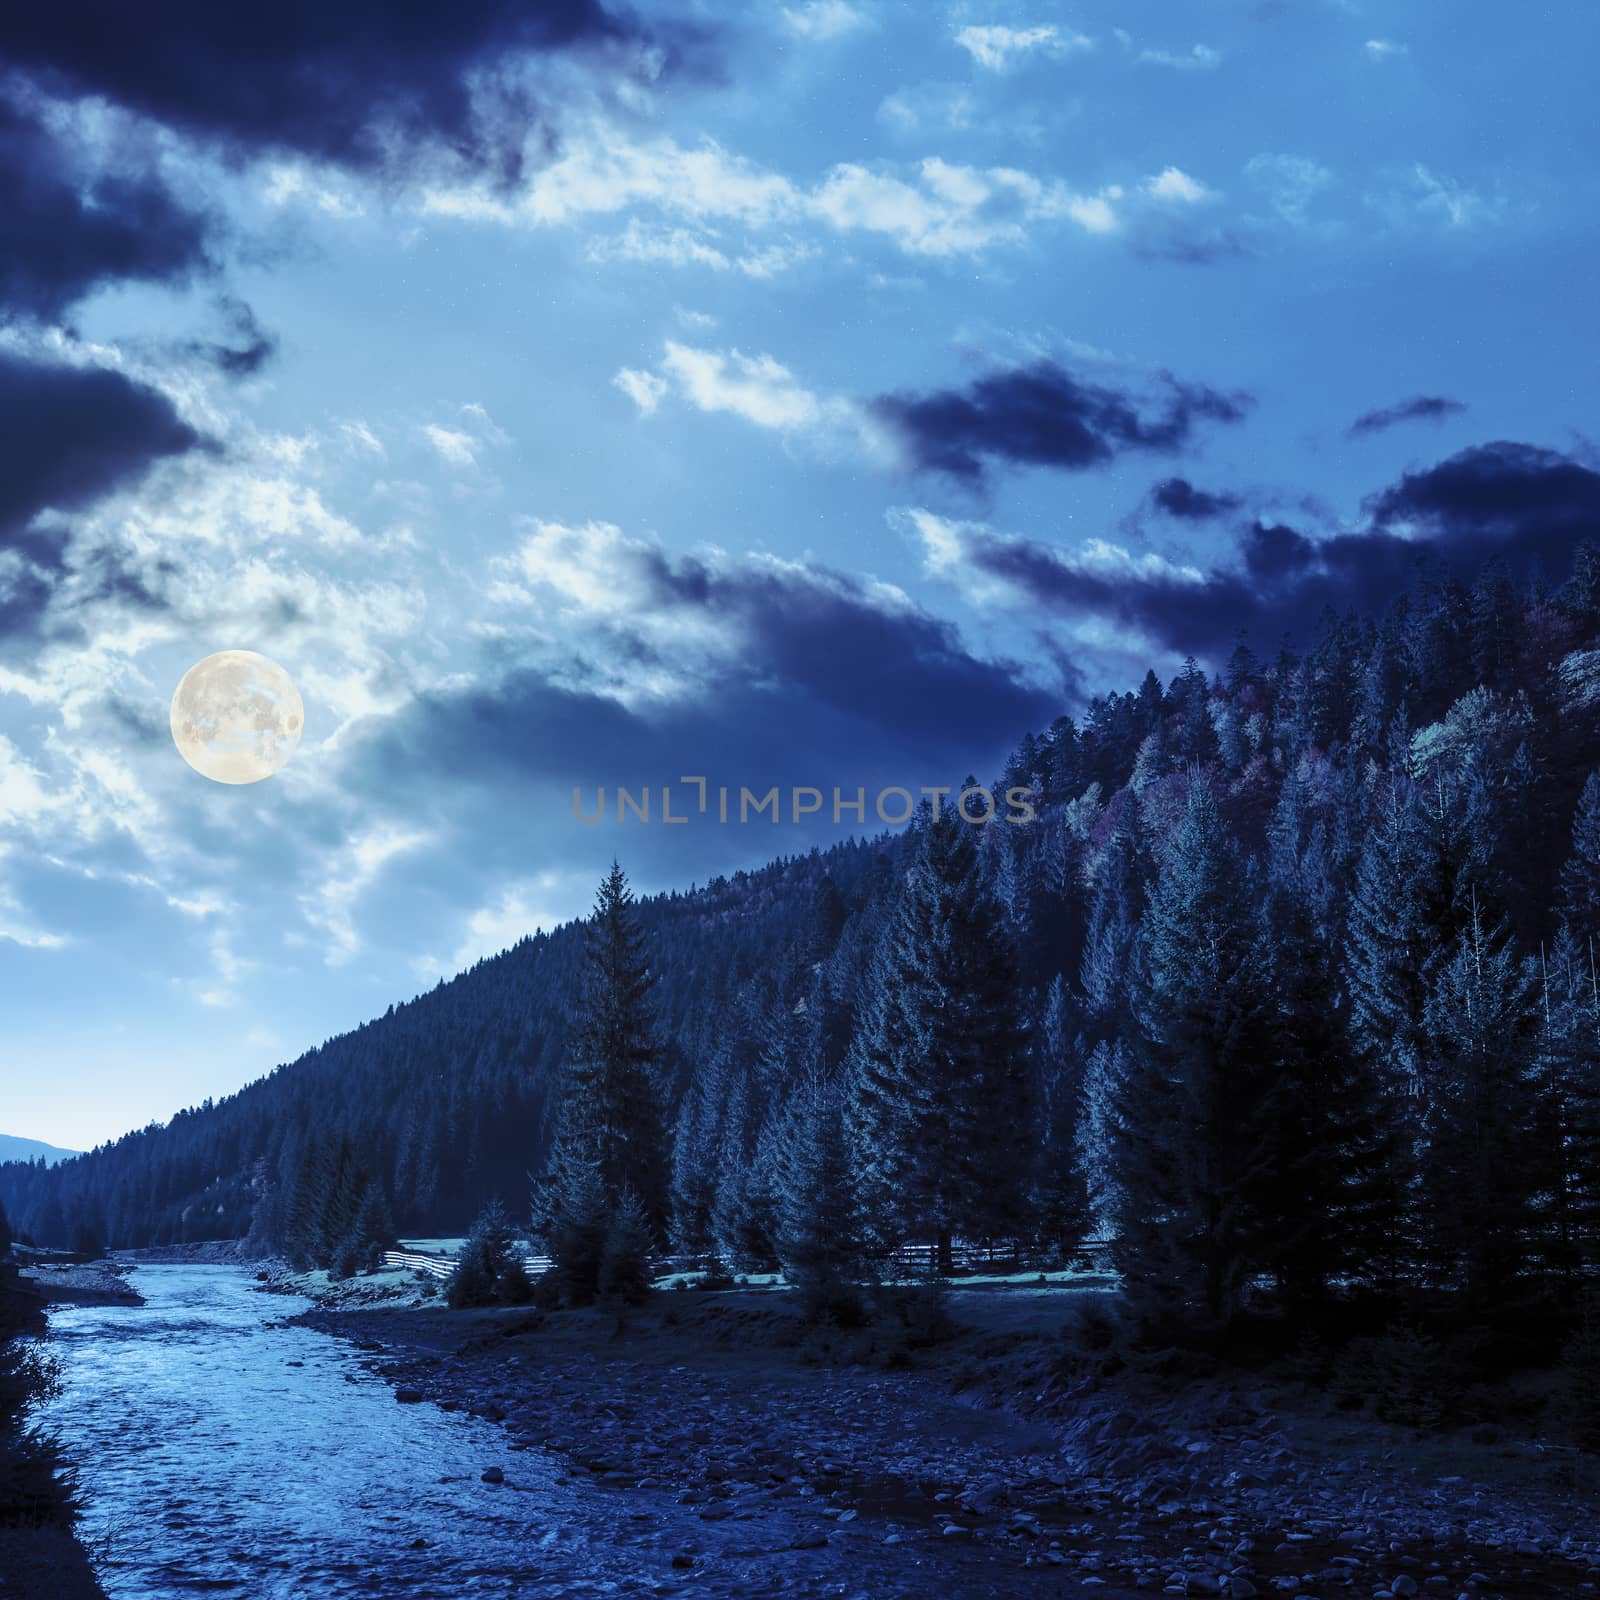 forest river in autumn mountains at night by Pellinni